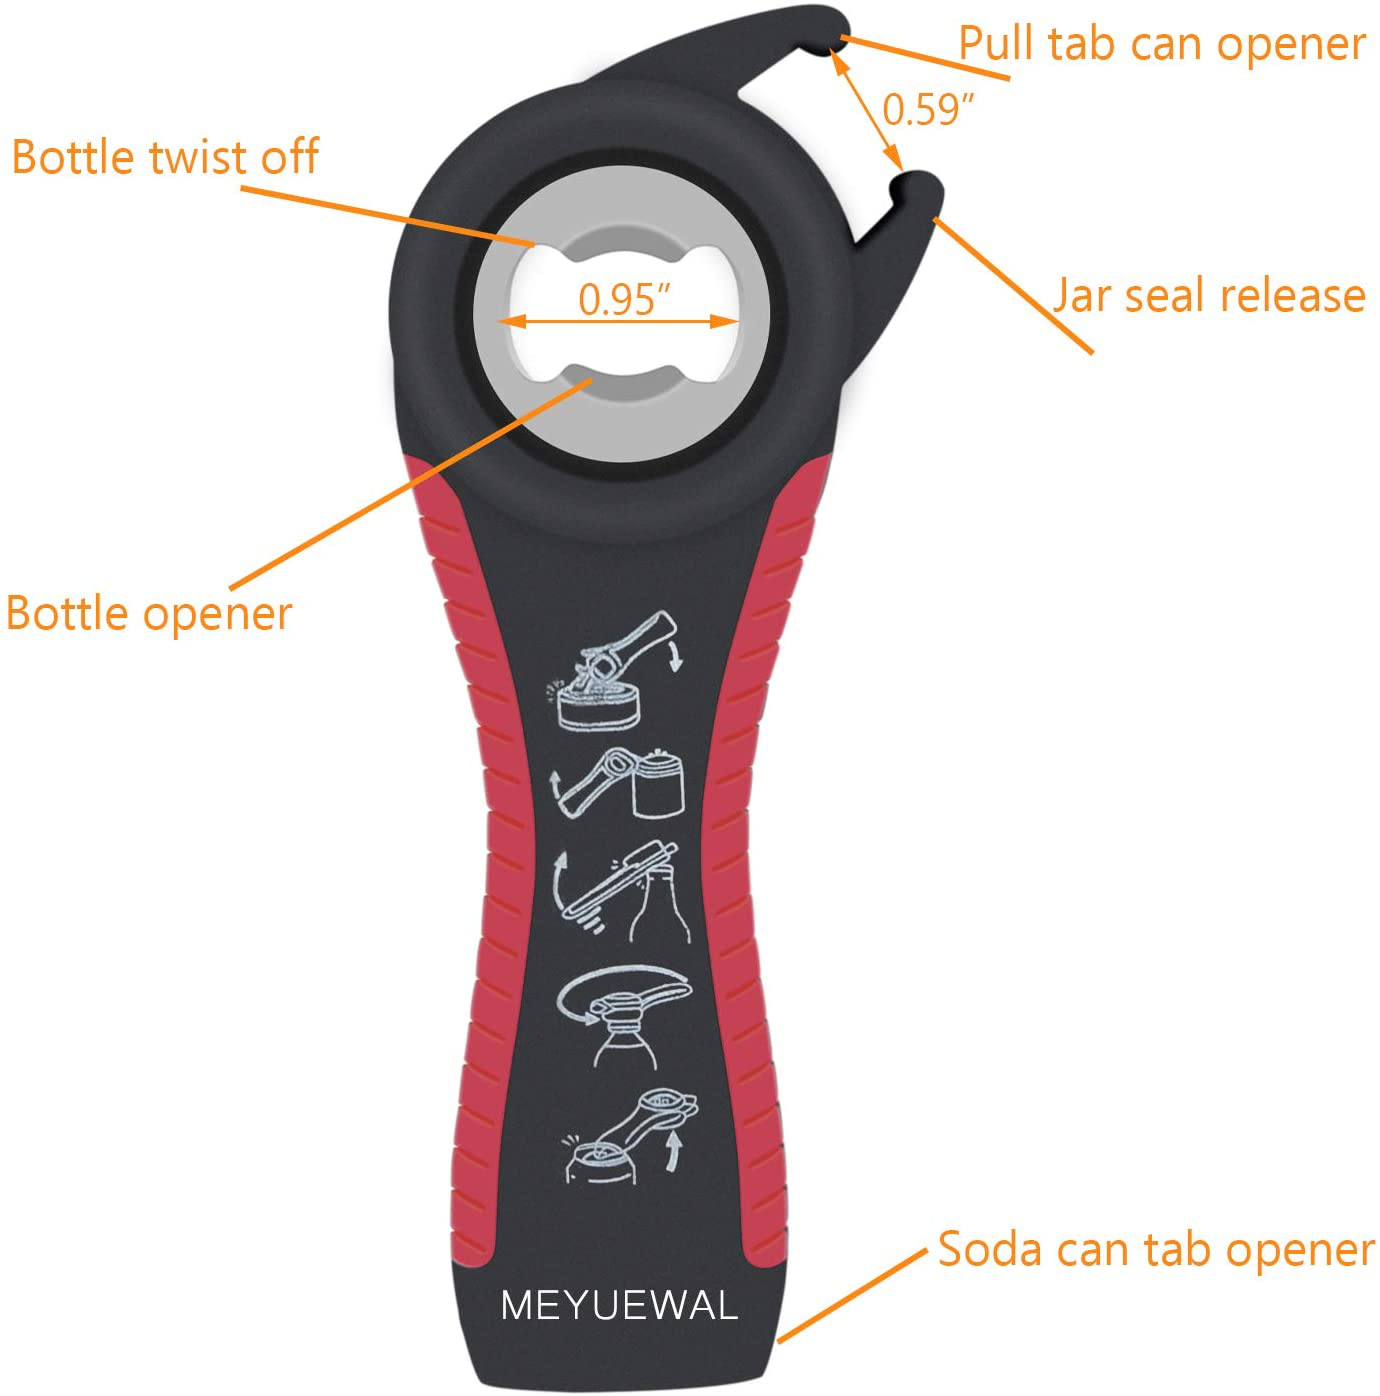 Jar Opener, 5 in 1 Multi Function Can Opener Bottle Opener Kit with Silicone Handle Easy to Use for Children, Elderly and Arthritis Sufferers (Apple Red）